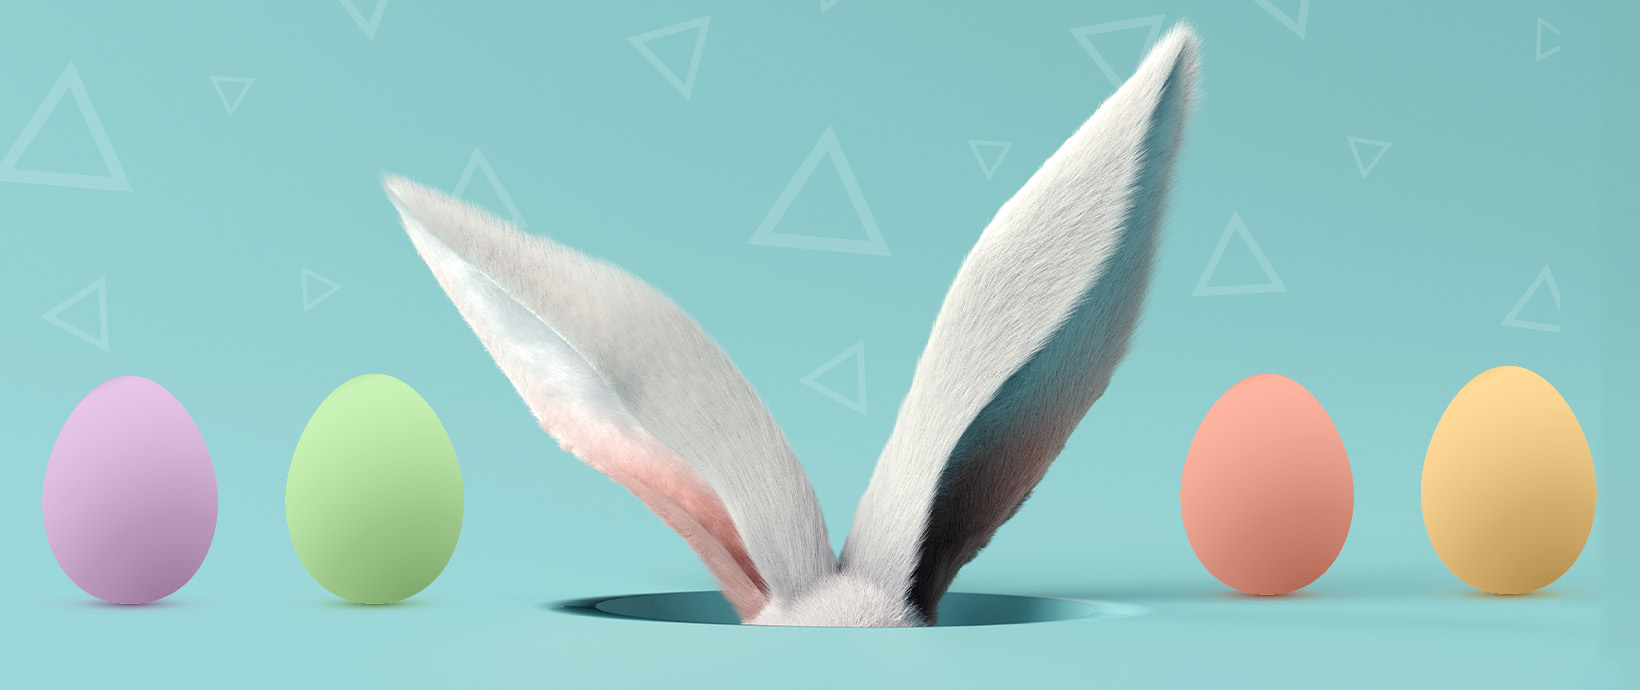 Digital Debunking: Can Simulation Help Create the Perfect Easter Egg Hunt?